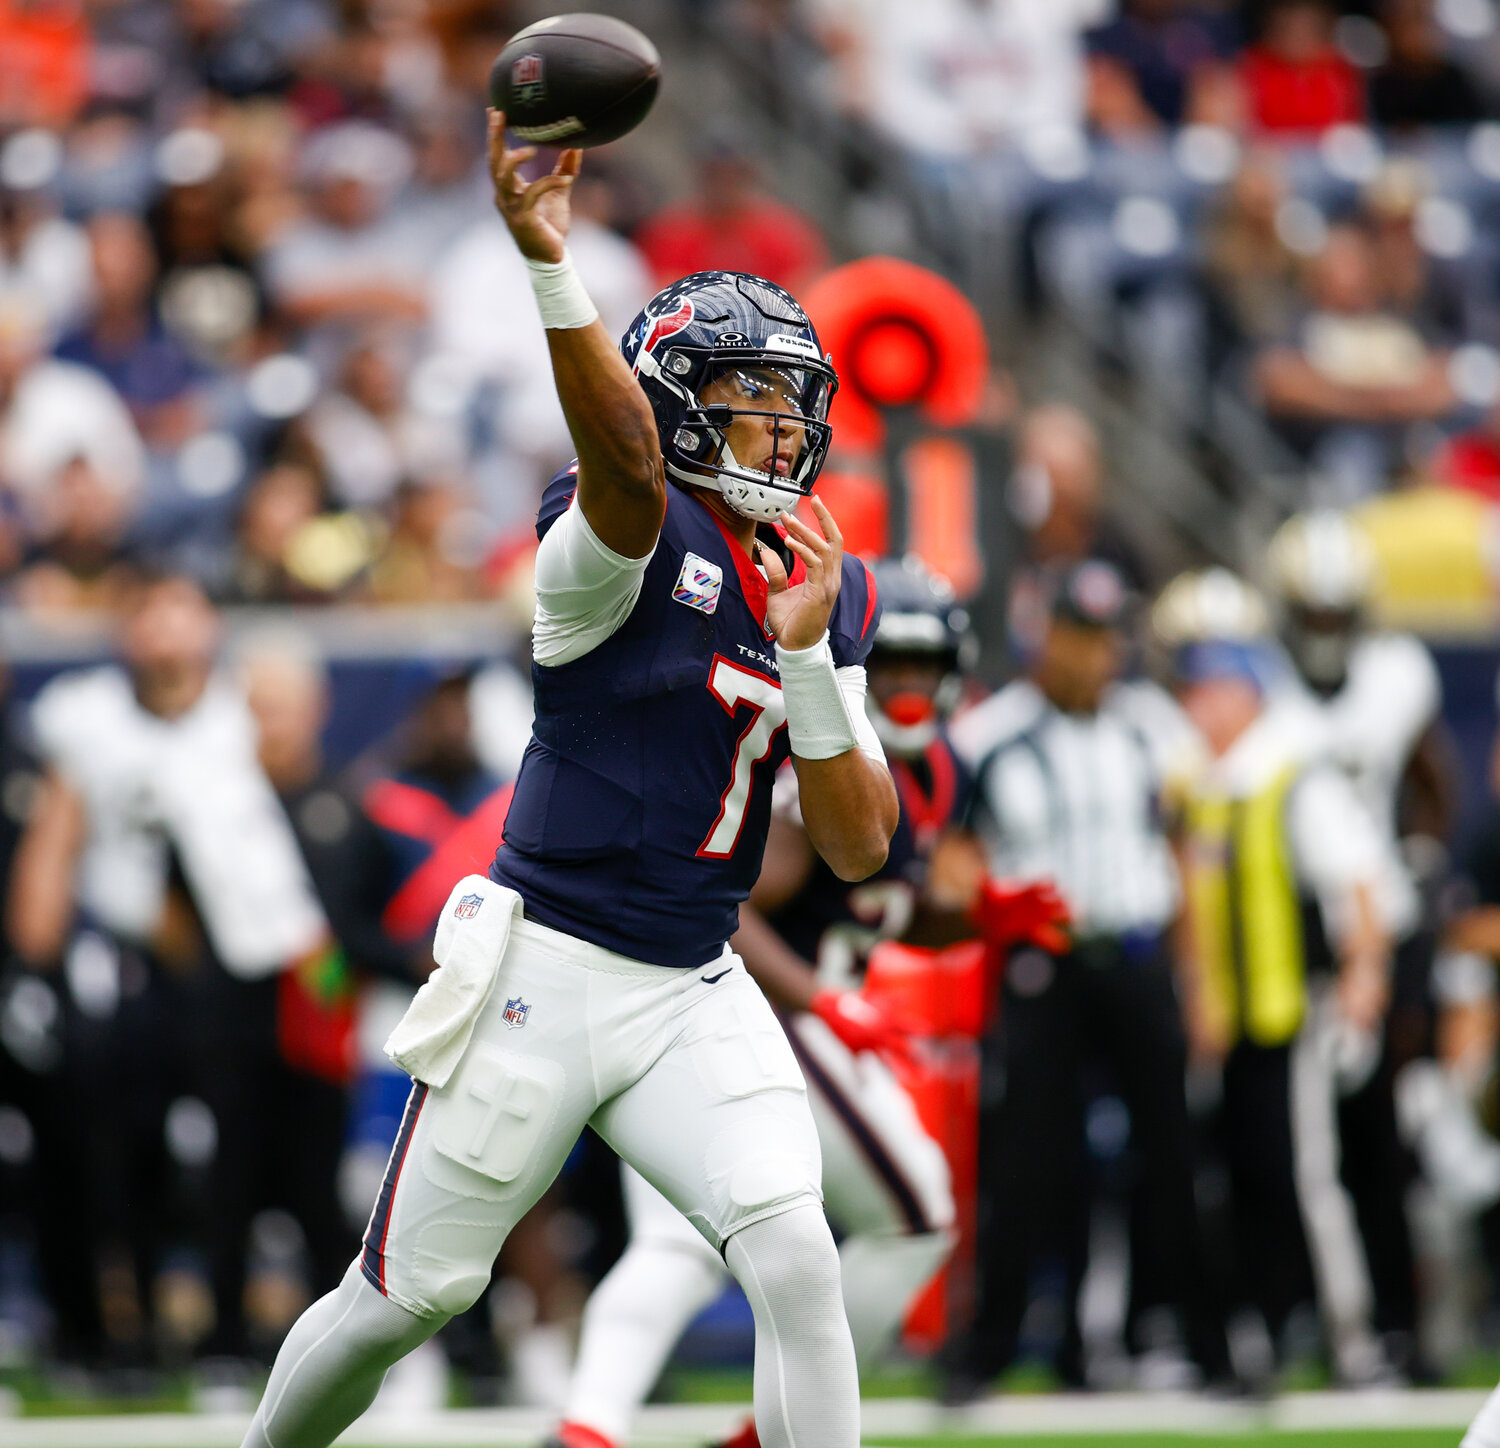 Texans quarterback C.J. Stroud (7) passes the ball during an NFL game between the Texans and the Saints on October 15, 2023 in Houston. The Texans won, 20-13.